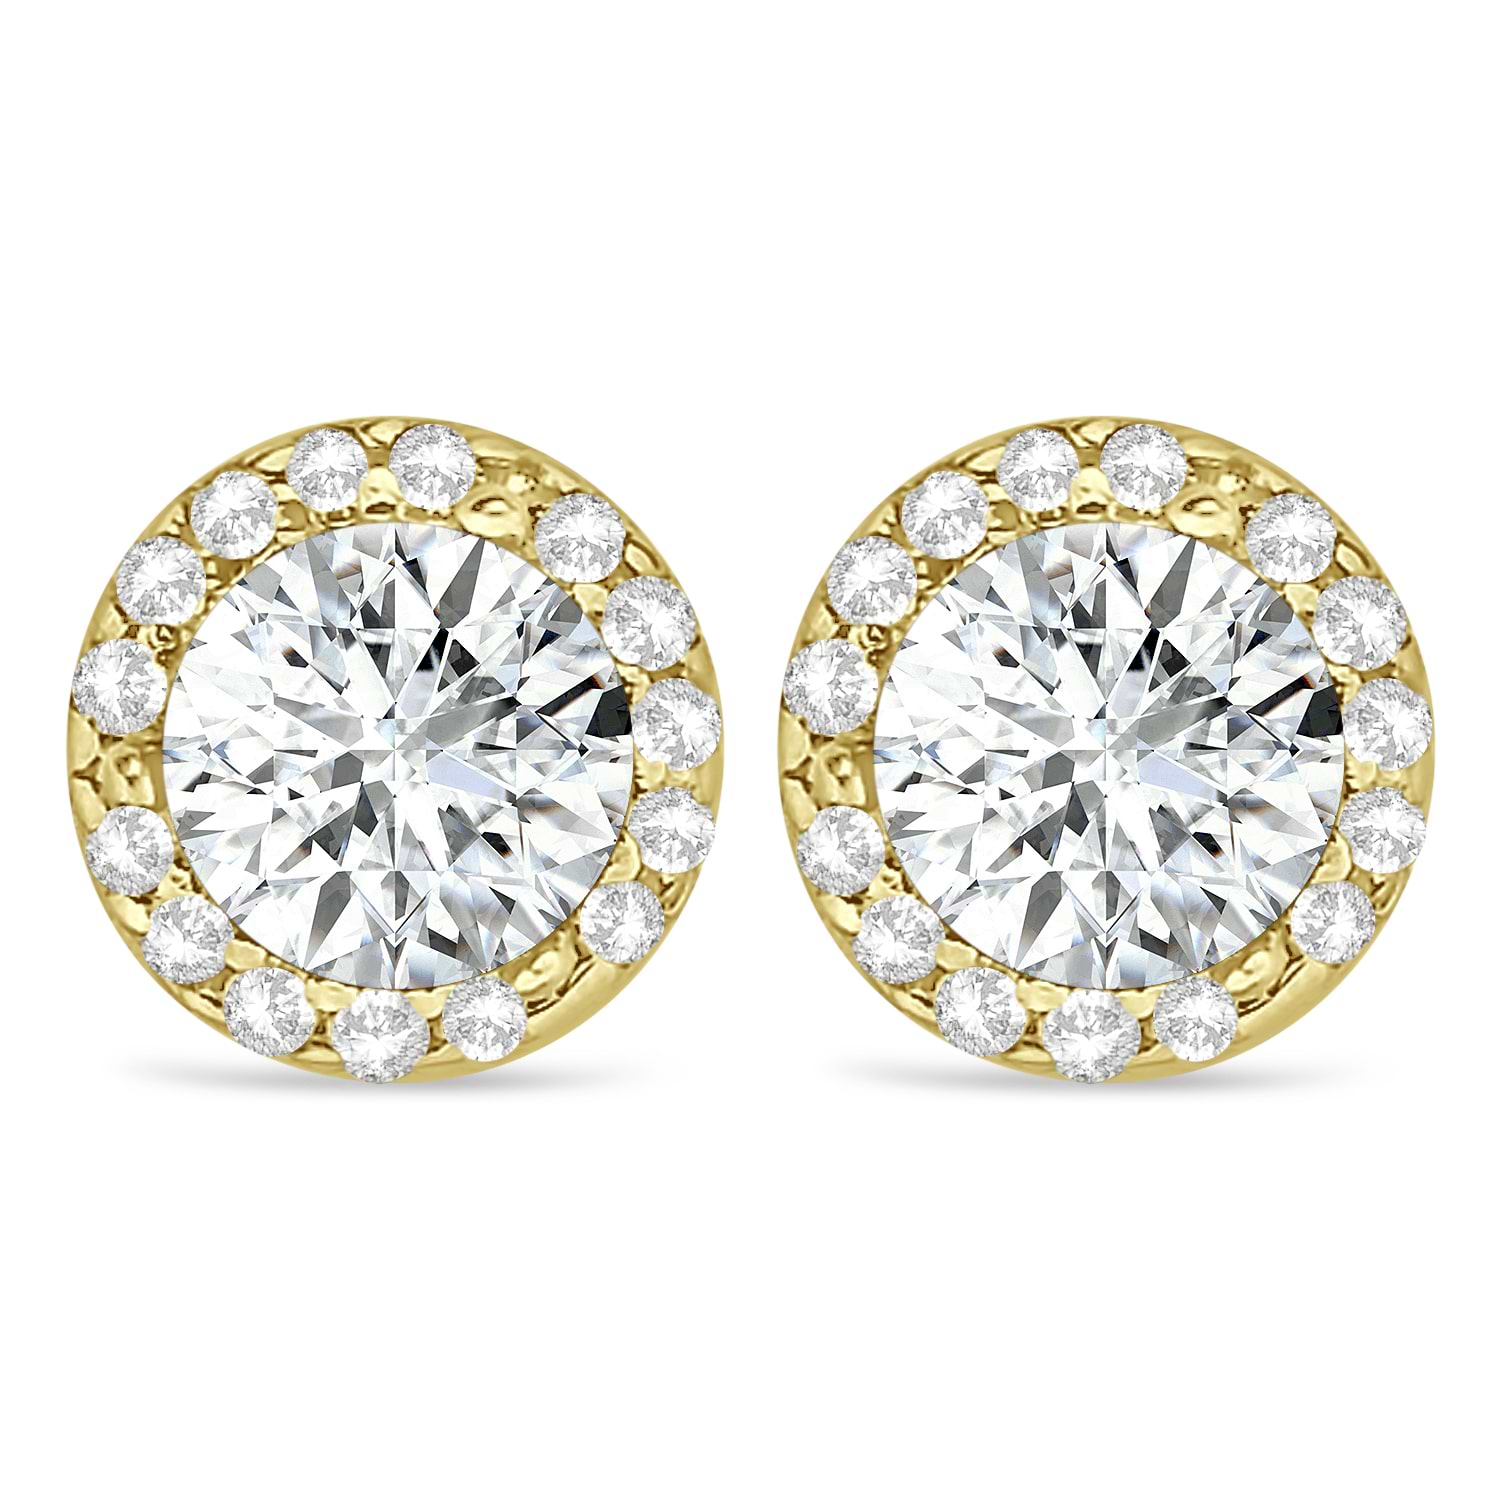 Diamond and Moissanite Earrings Halo 14K Yellow Gold (0.82ct)